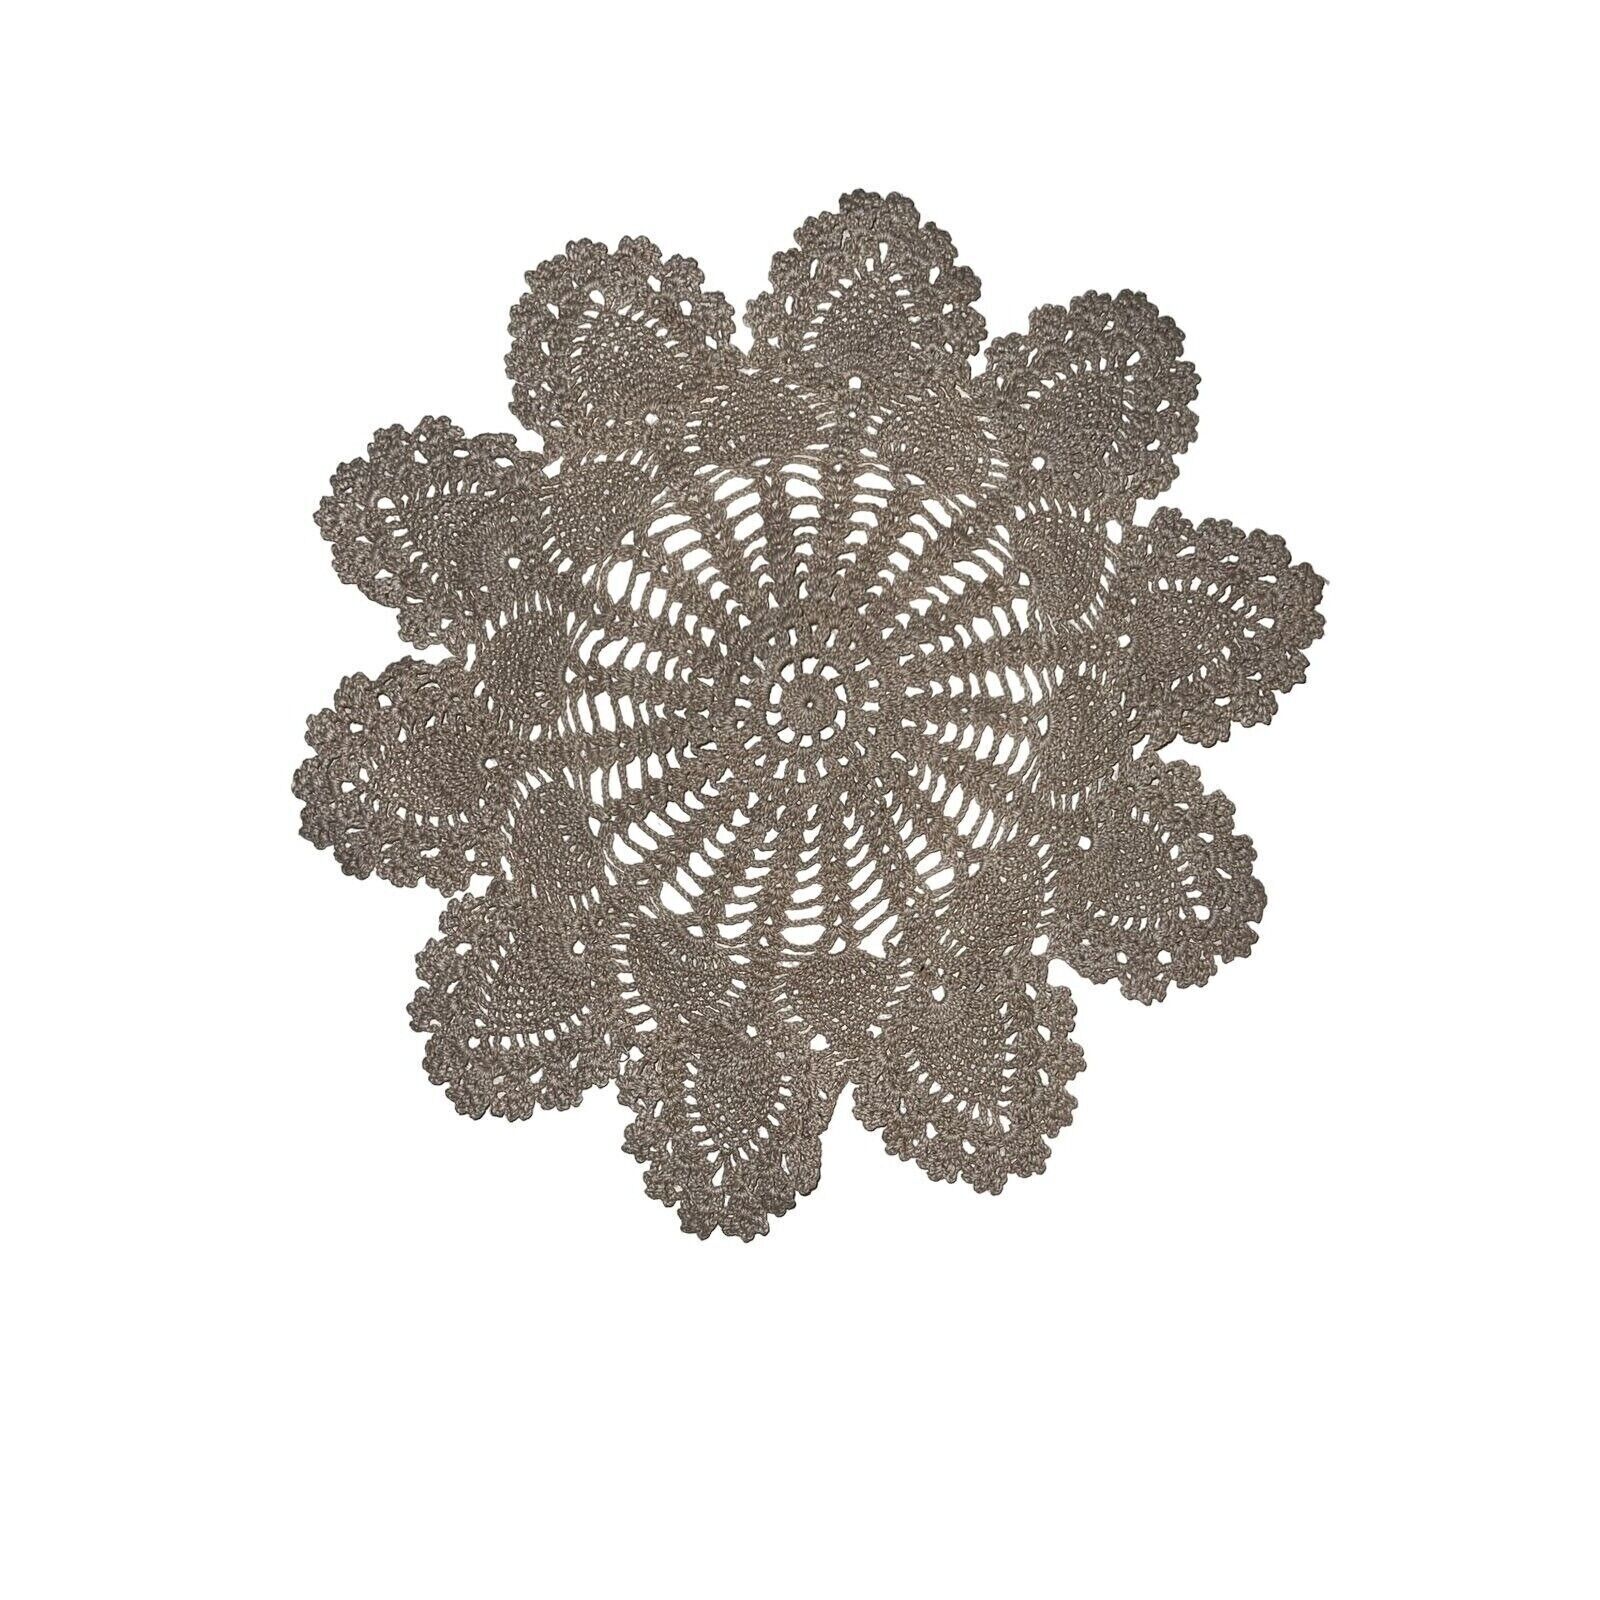 Vintage Pineapple Doily Handmade Table Lace Knit Country Room Decor 9”